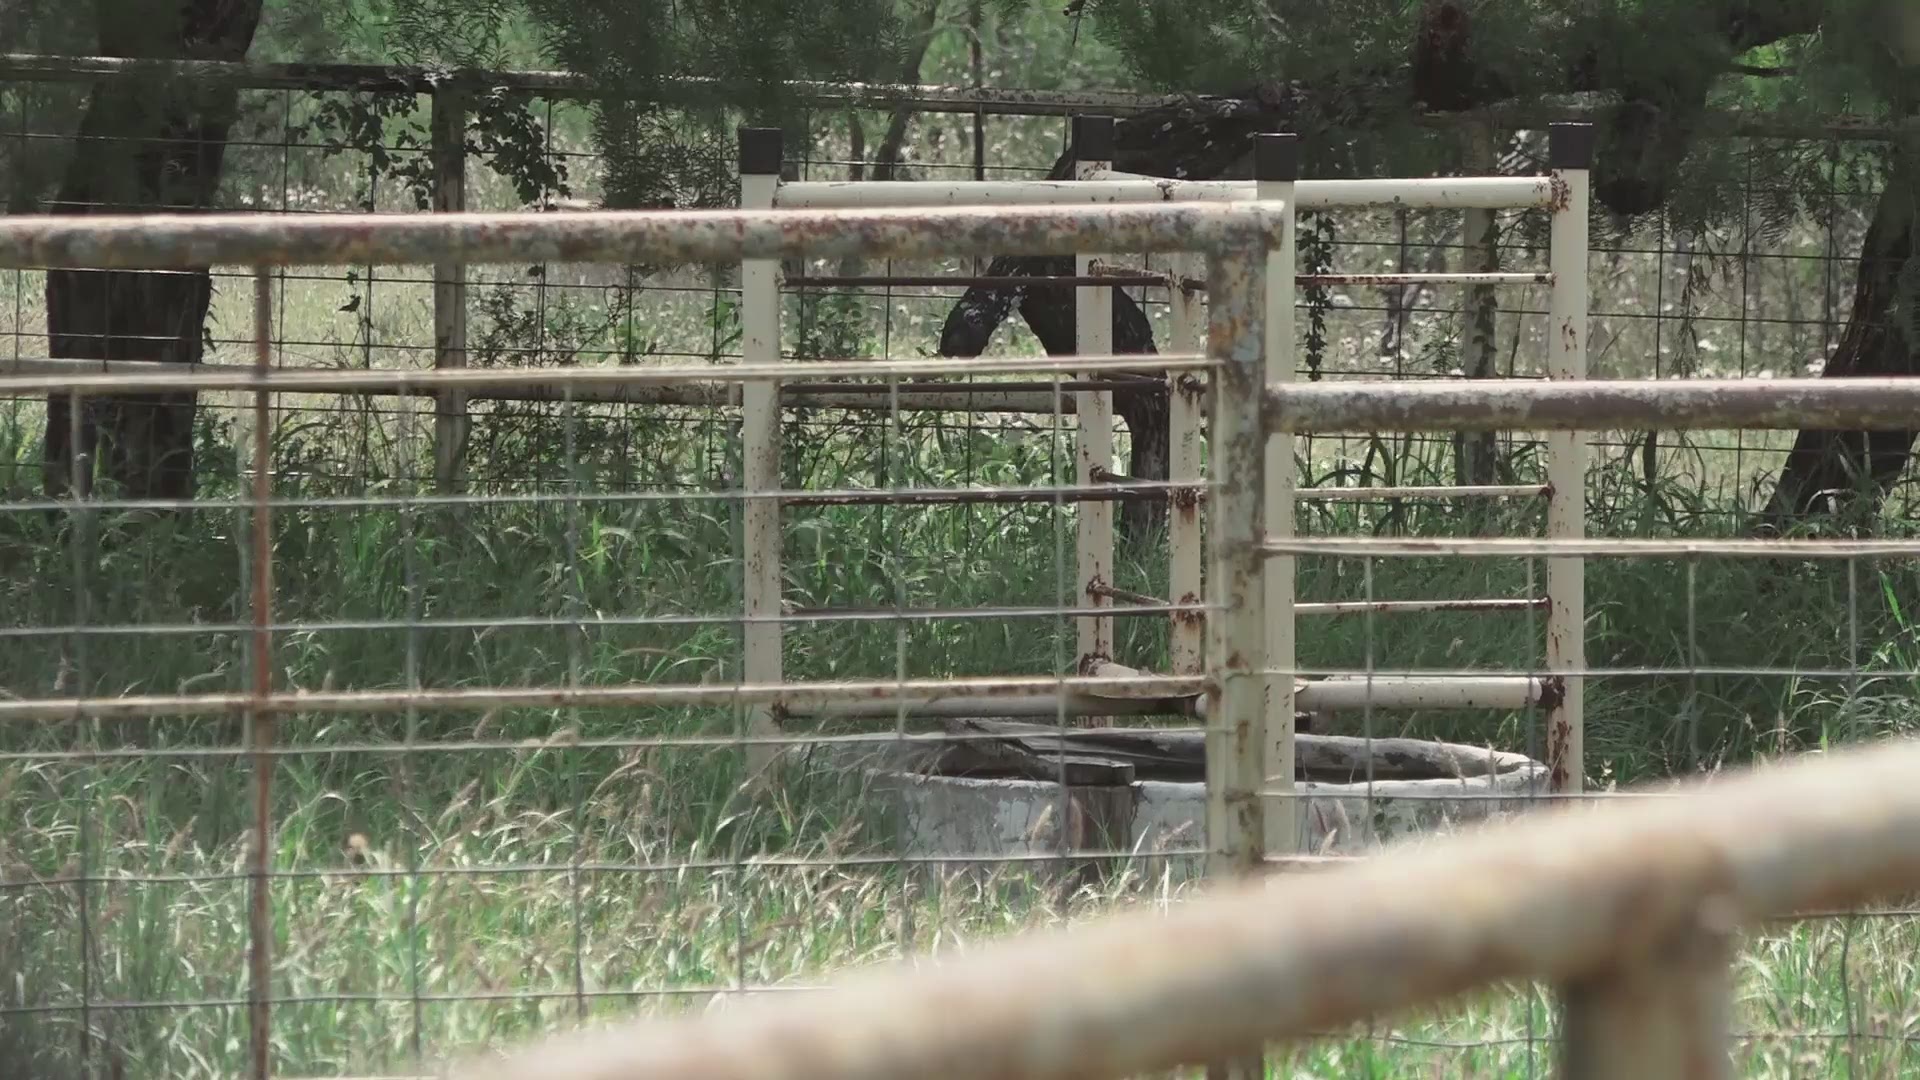 One Texas ranch owner is offering up his property to protect his livelihood.